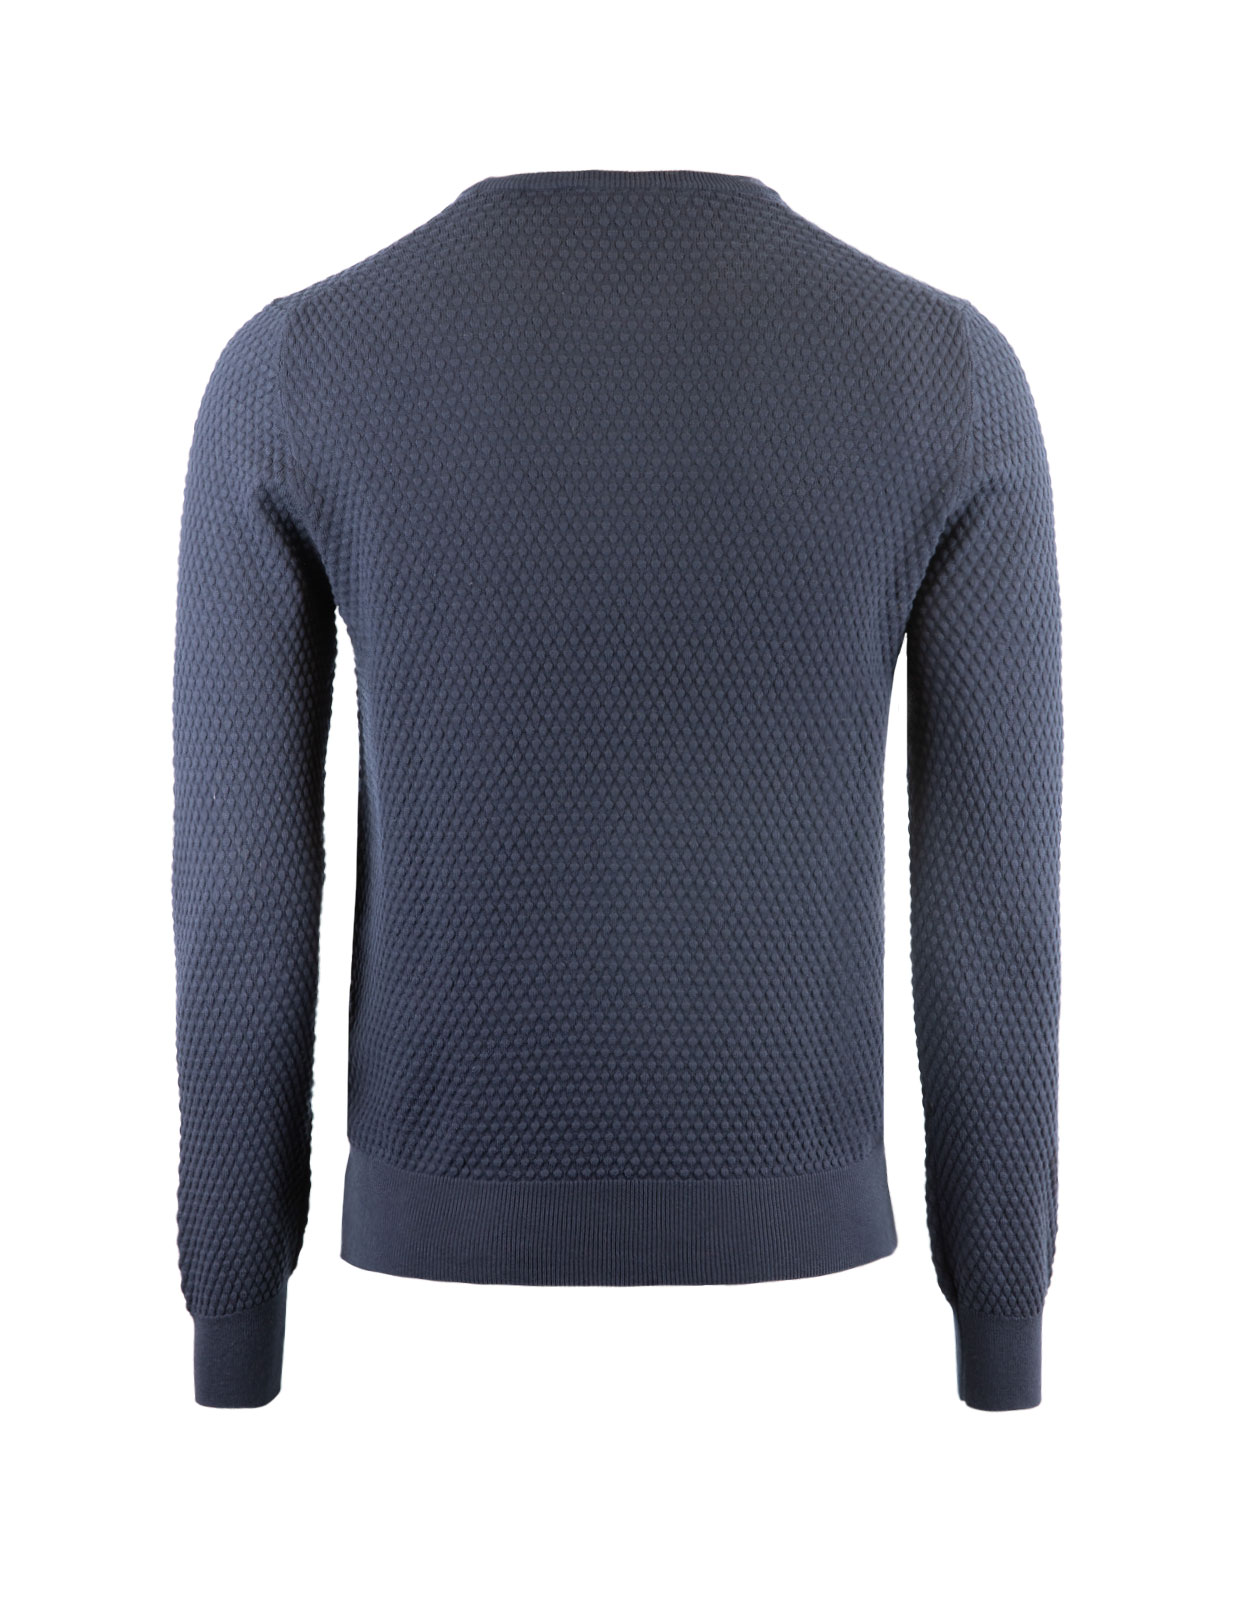 Bubble Knitted Crew Neck Navy